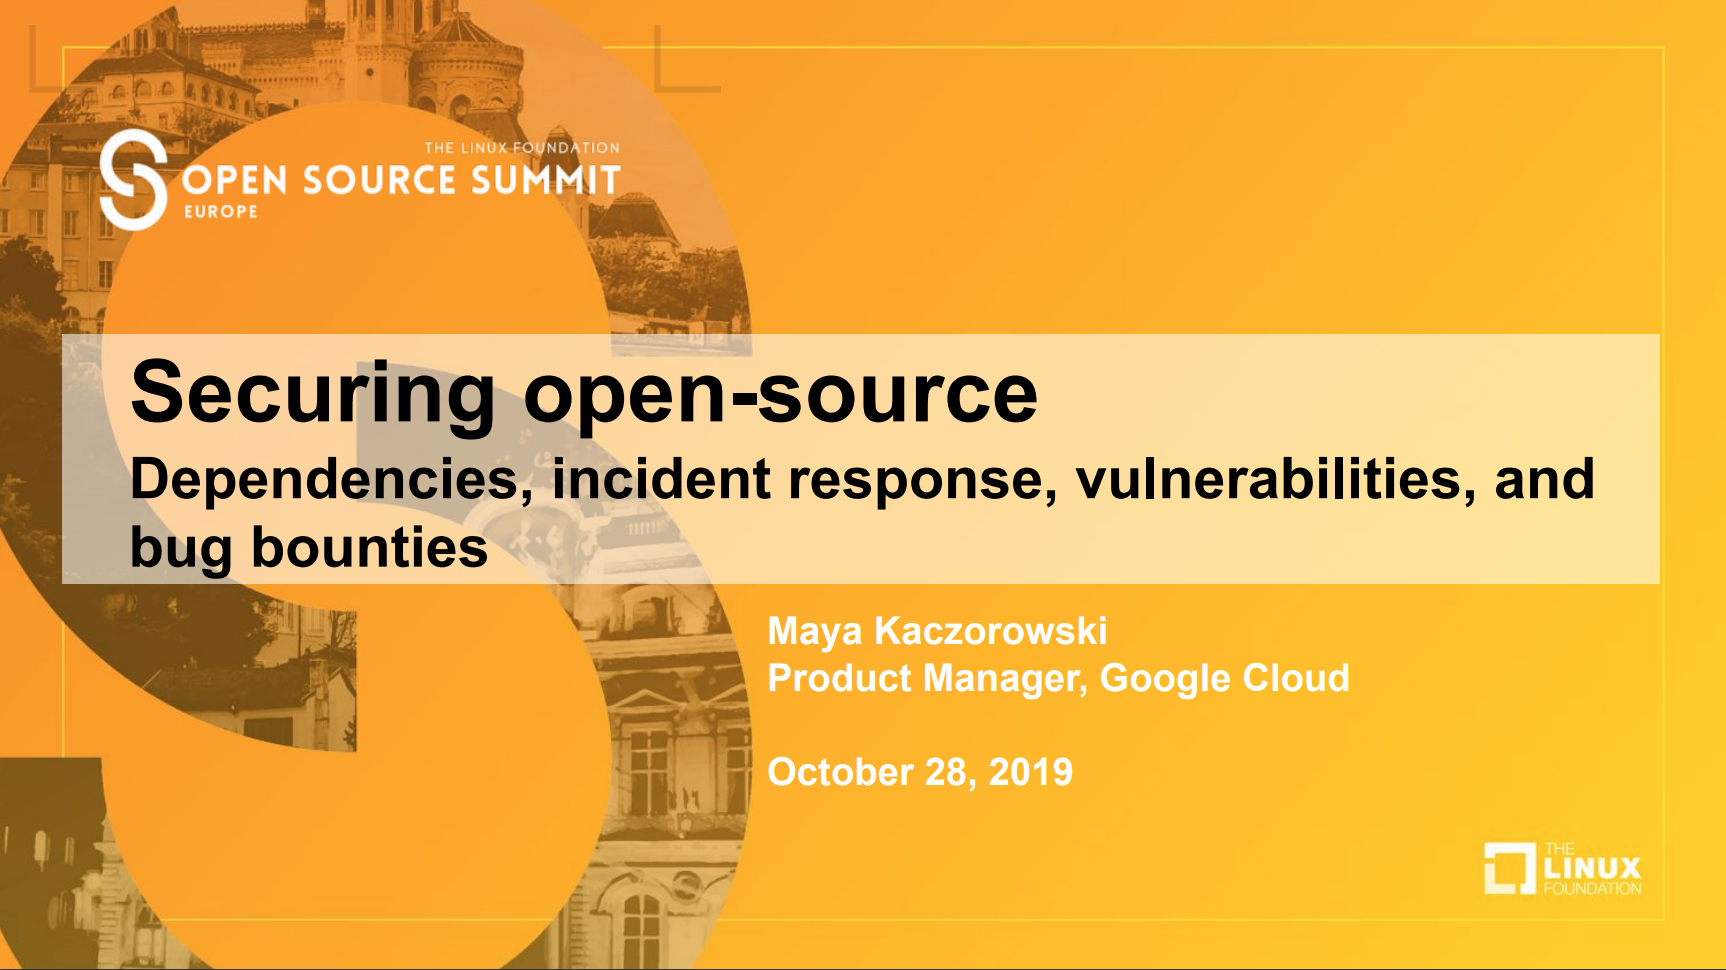 Open Source Summit Europe 2019 | Securing open-source